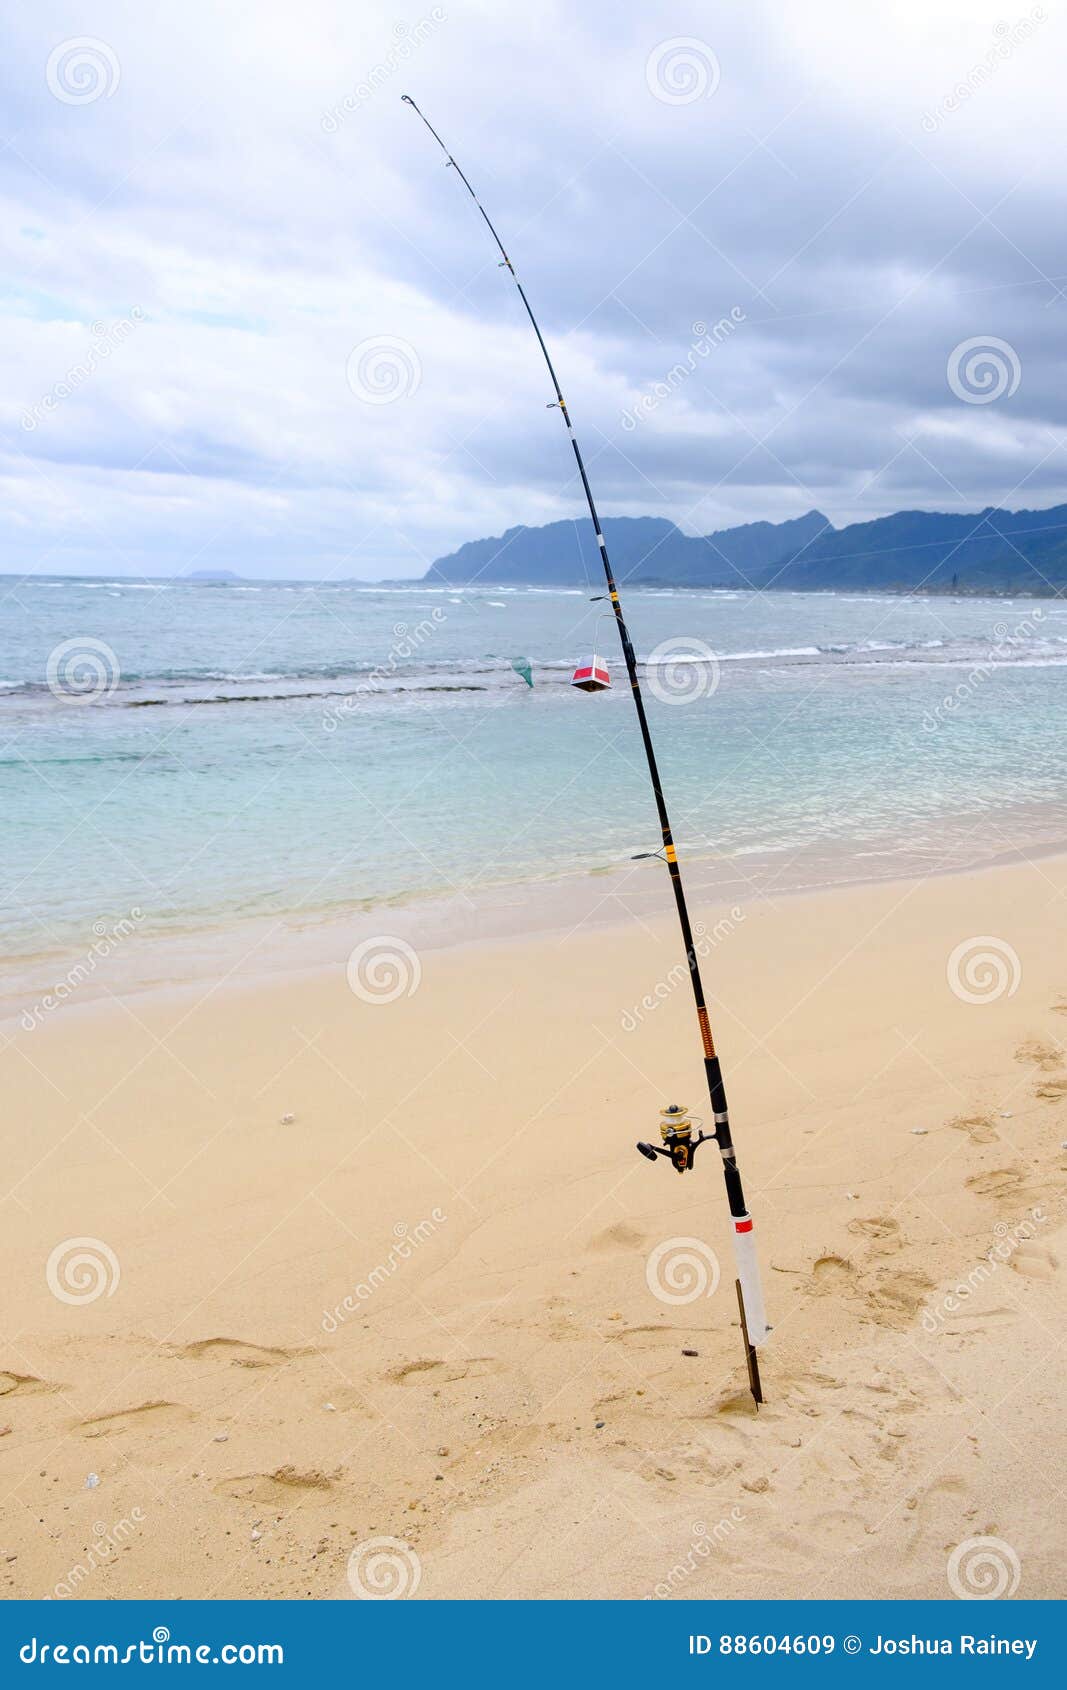 Saltwater Fishing Pole and Ocean Stock Image - Image of fisherman